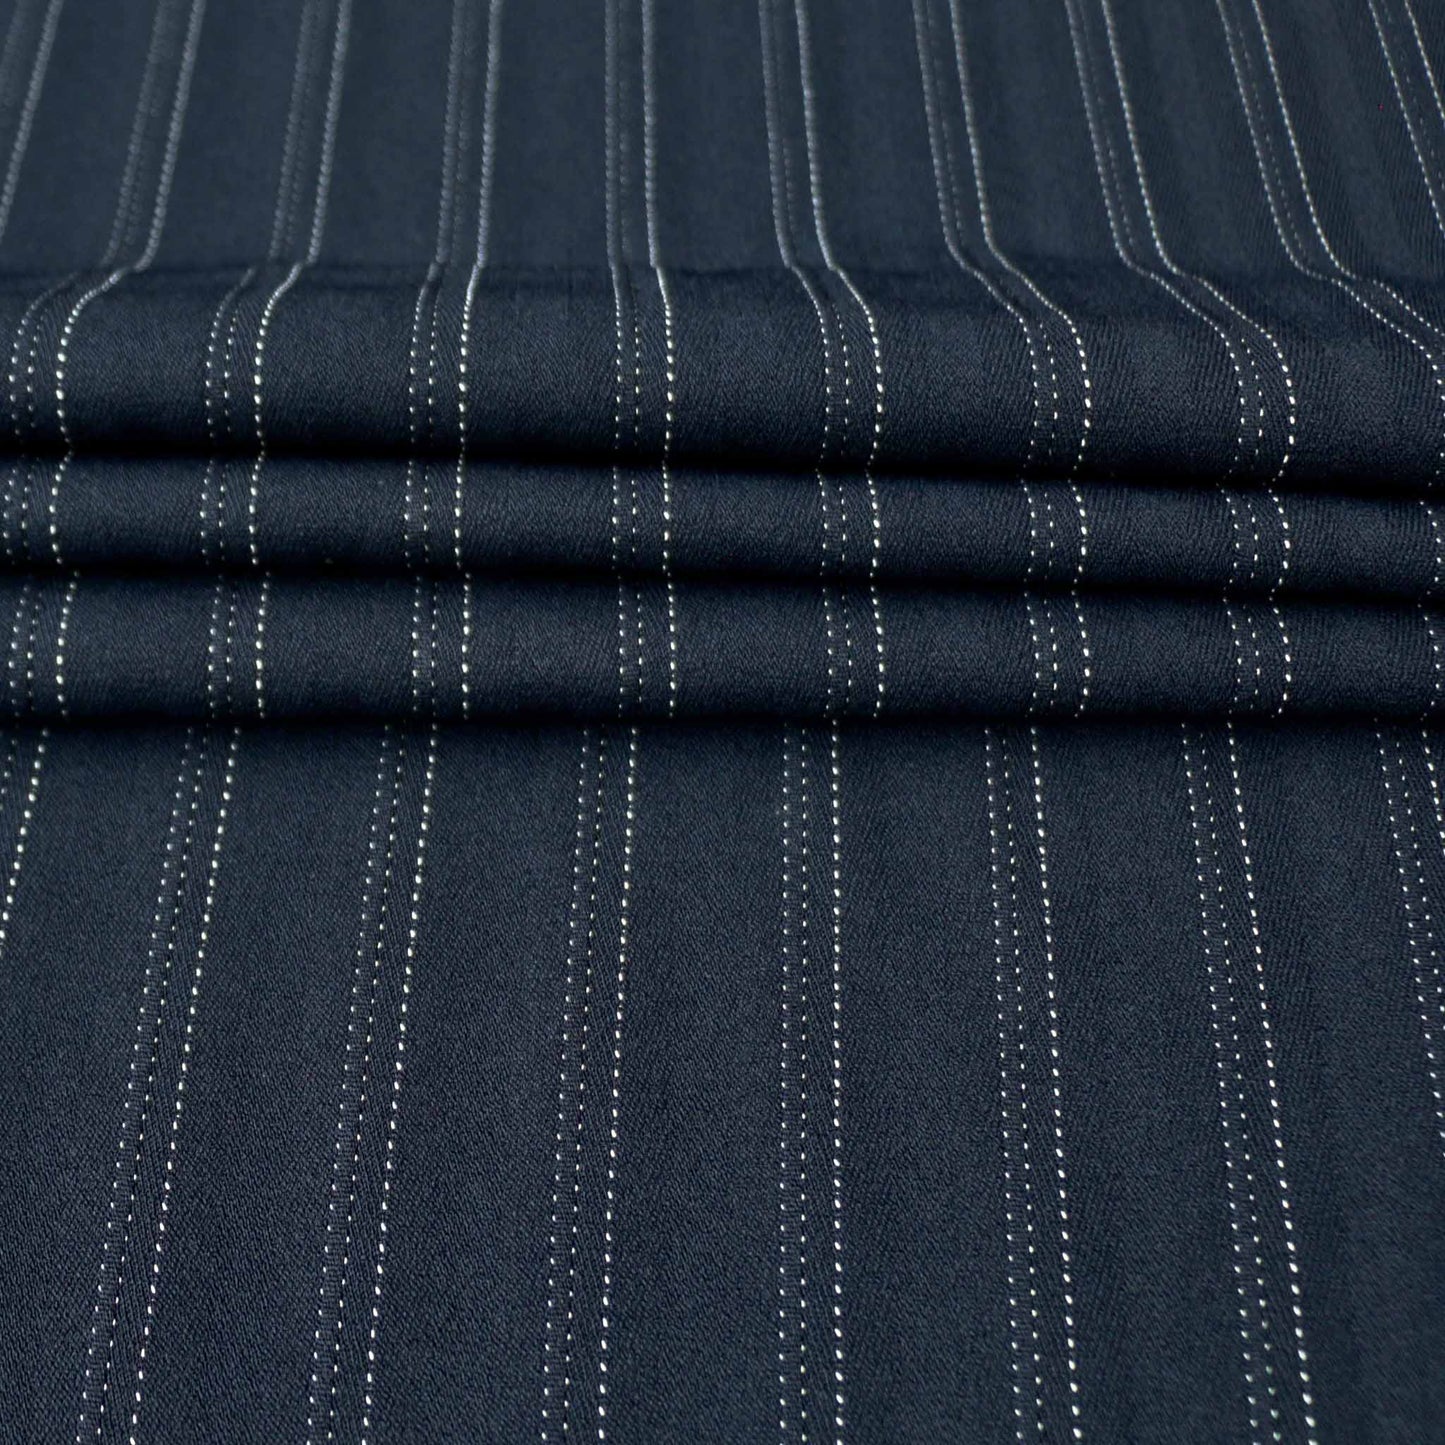 stretch navy suiting fabric with white dotted pinstripe design